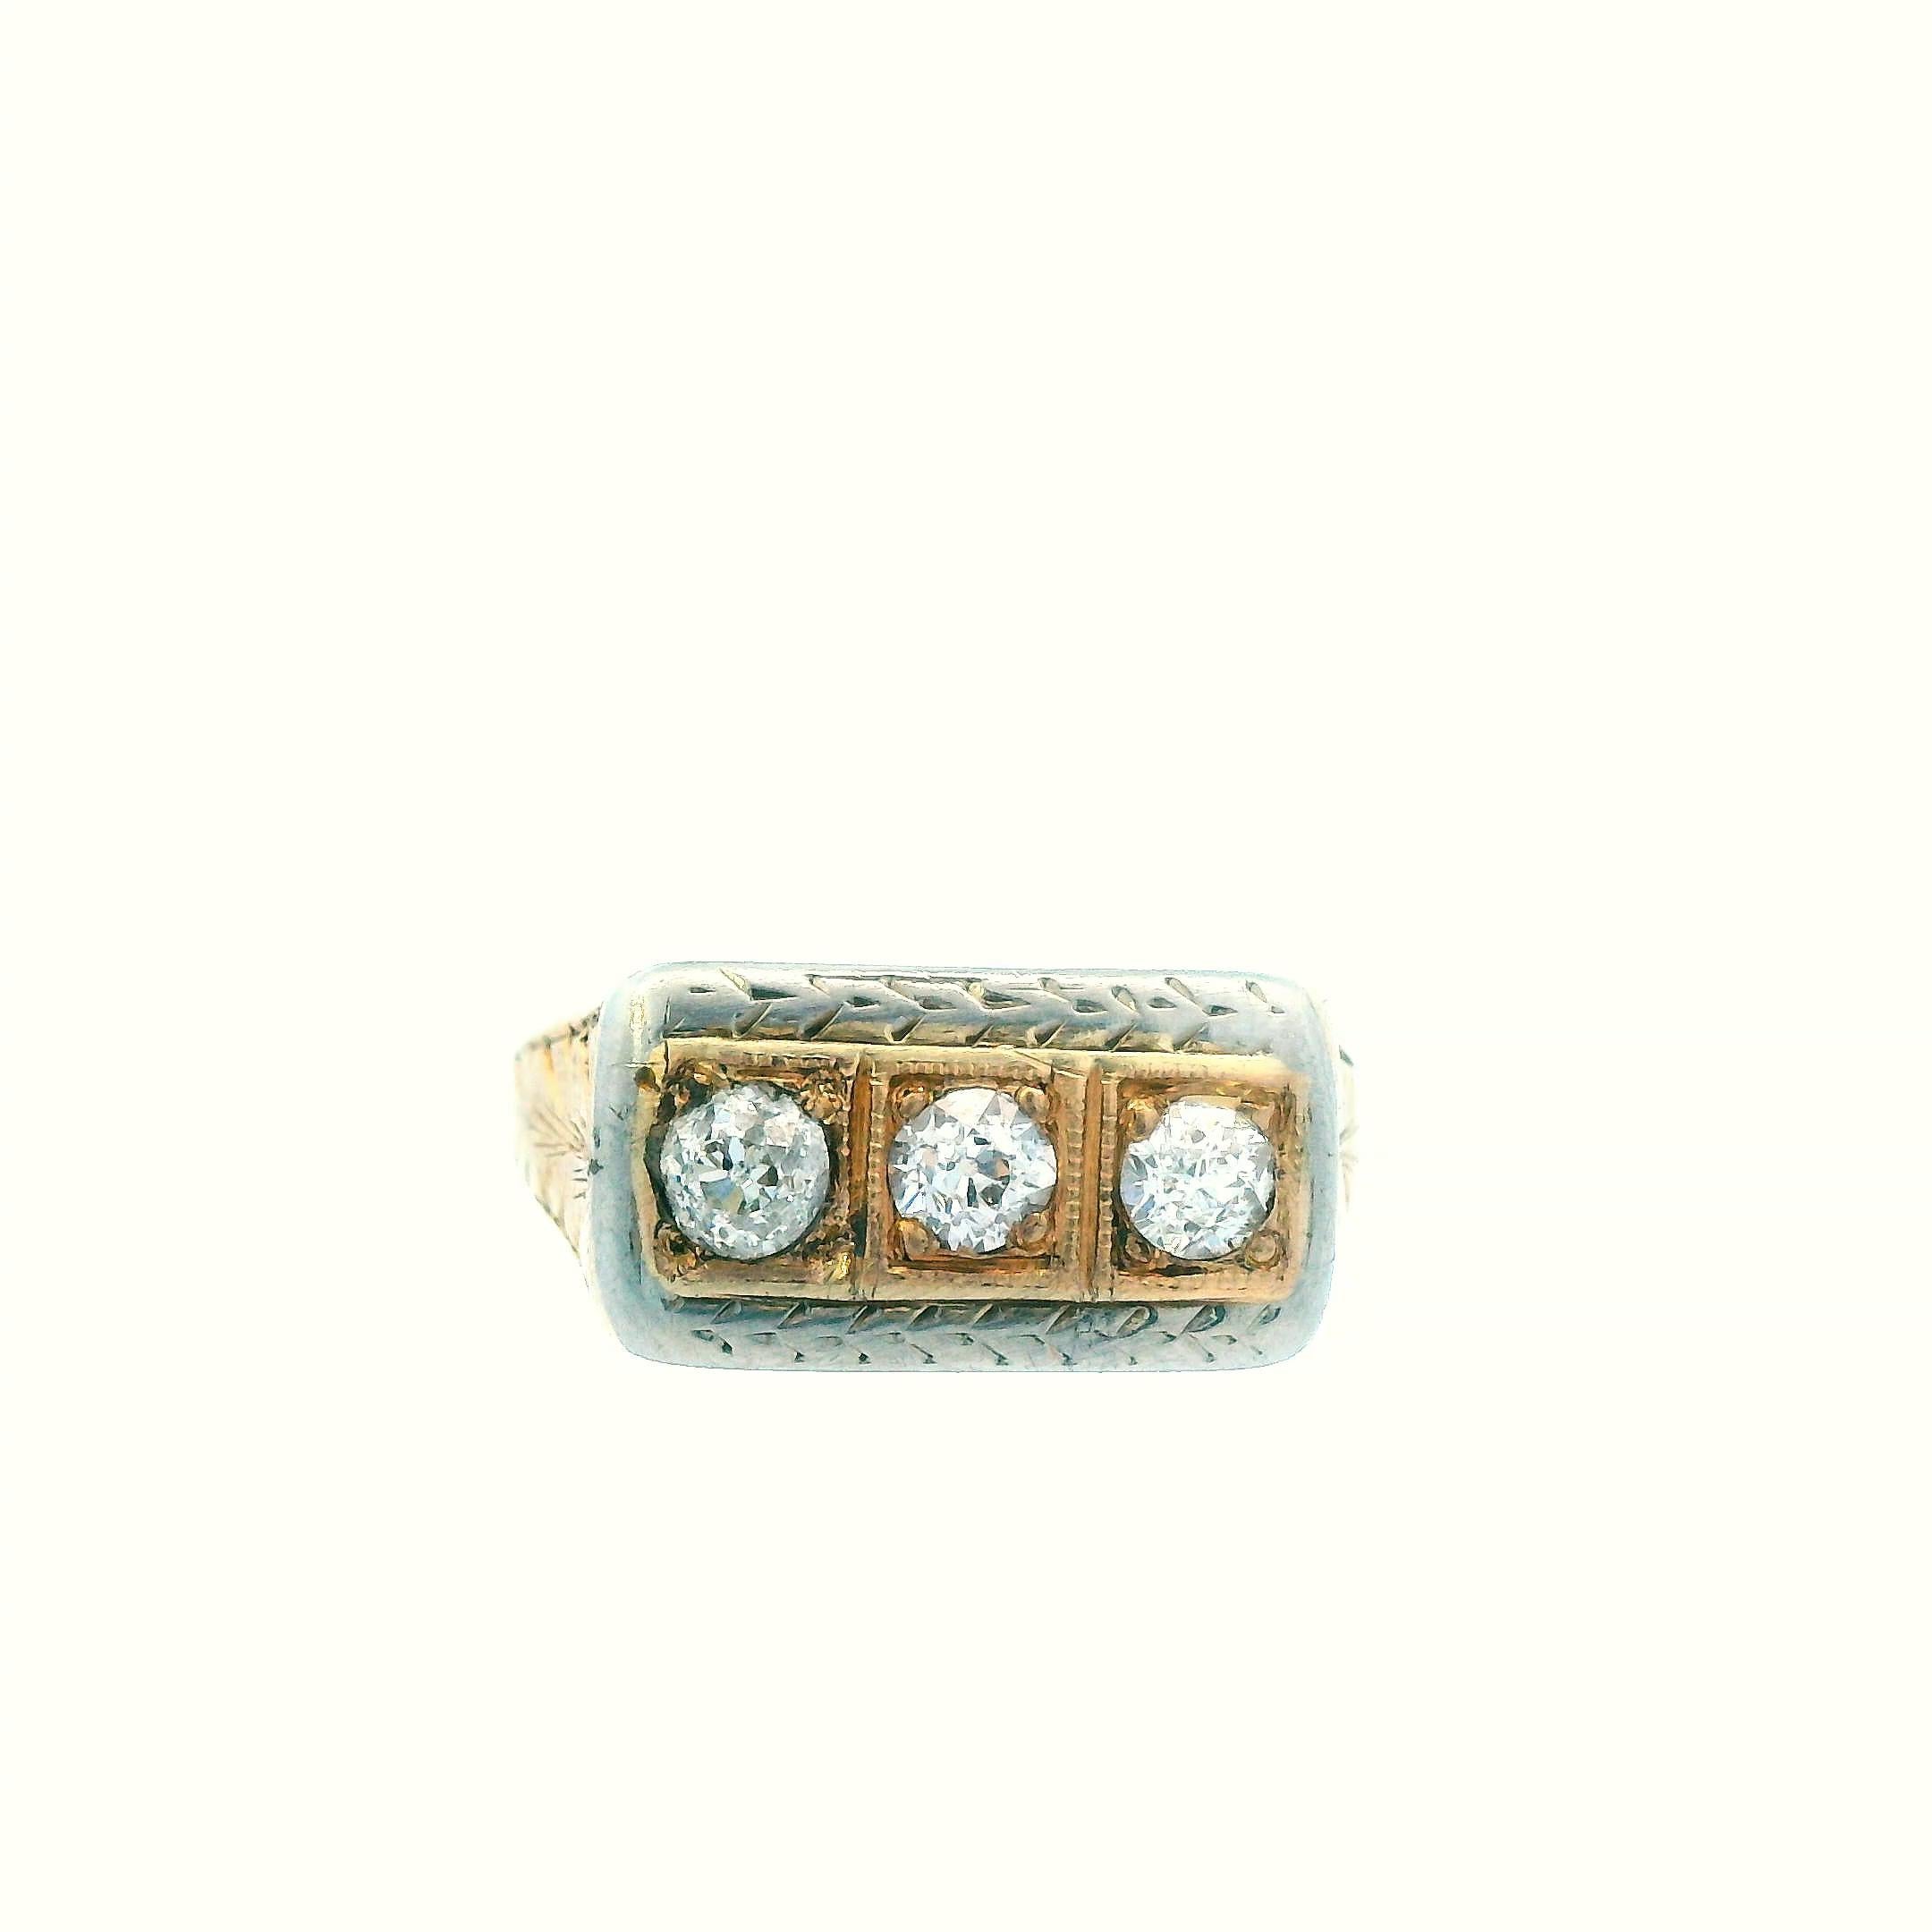 1925 Art Deco 14k Yellow and White Gold Two Tone Diamond 3 Stone Ring For Sale 1